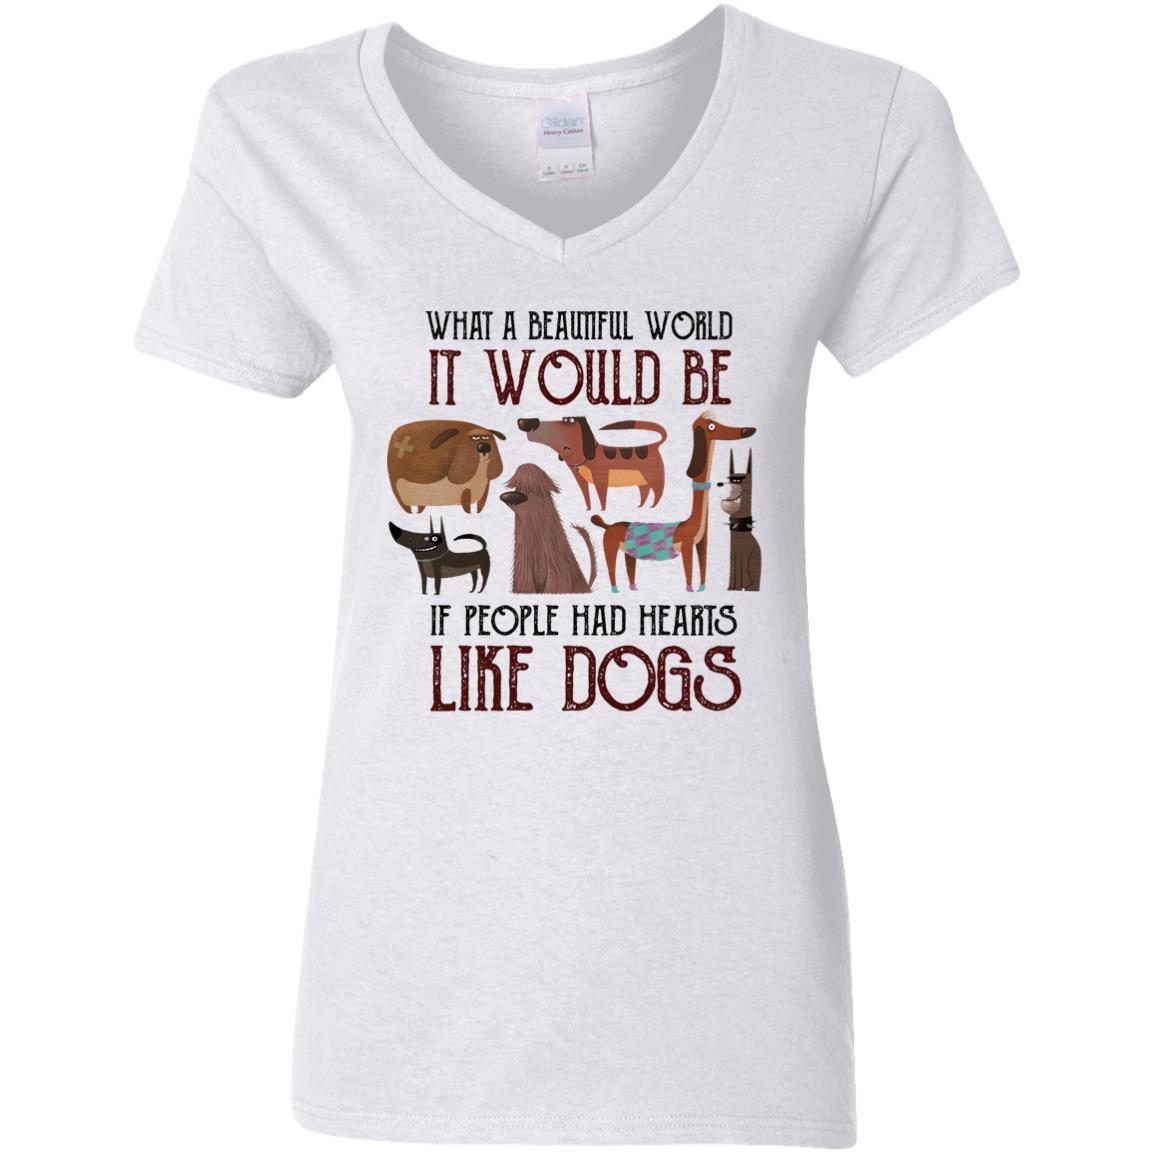 What A Beautiful World It Would Be If People Had Hearts Like Dogs shirt 7